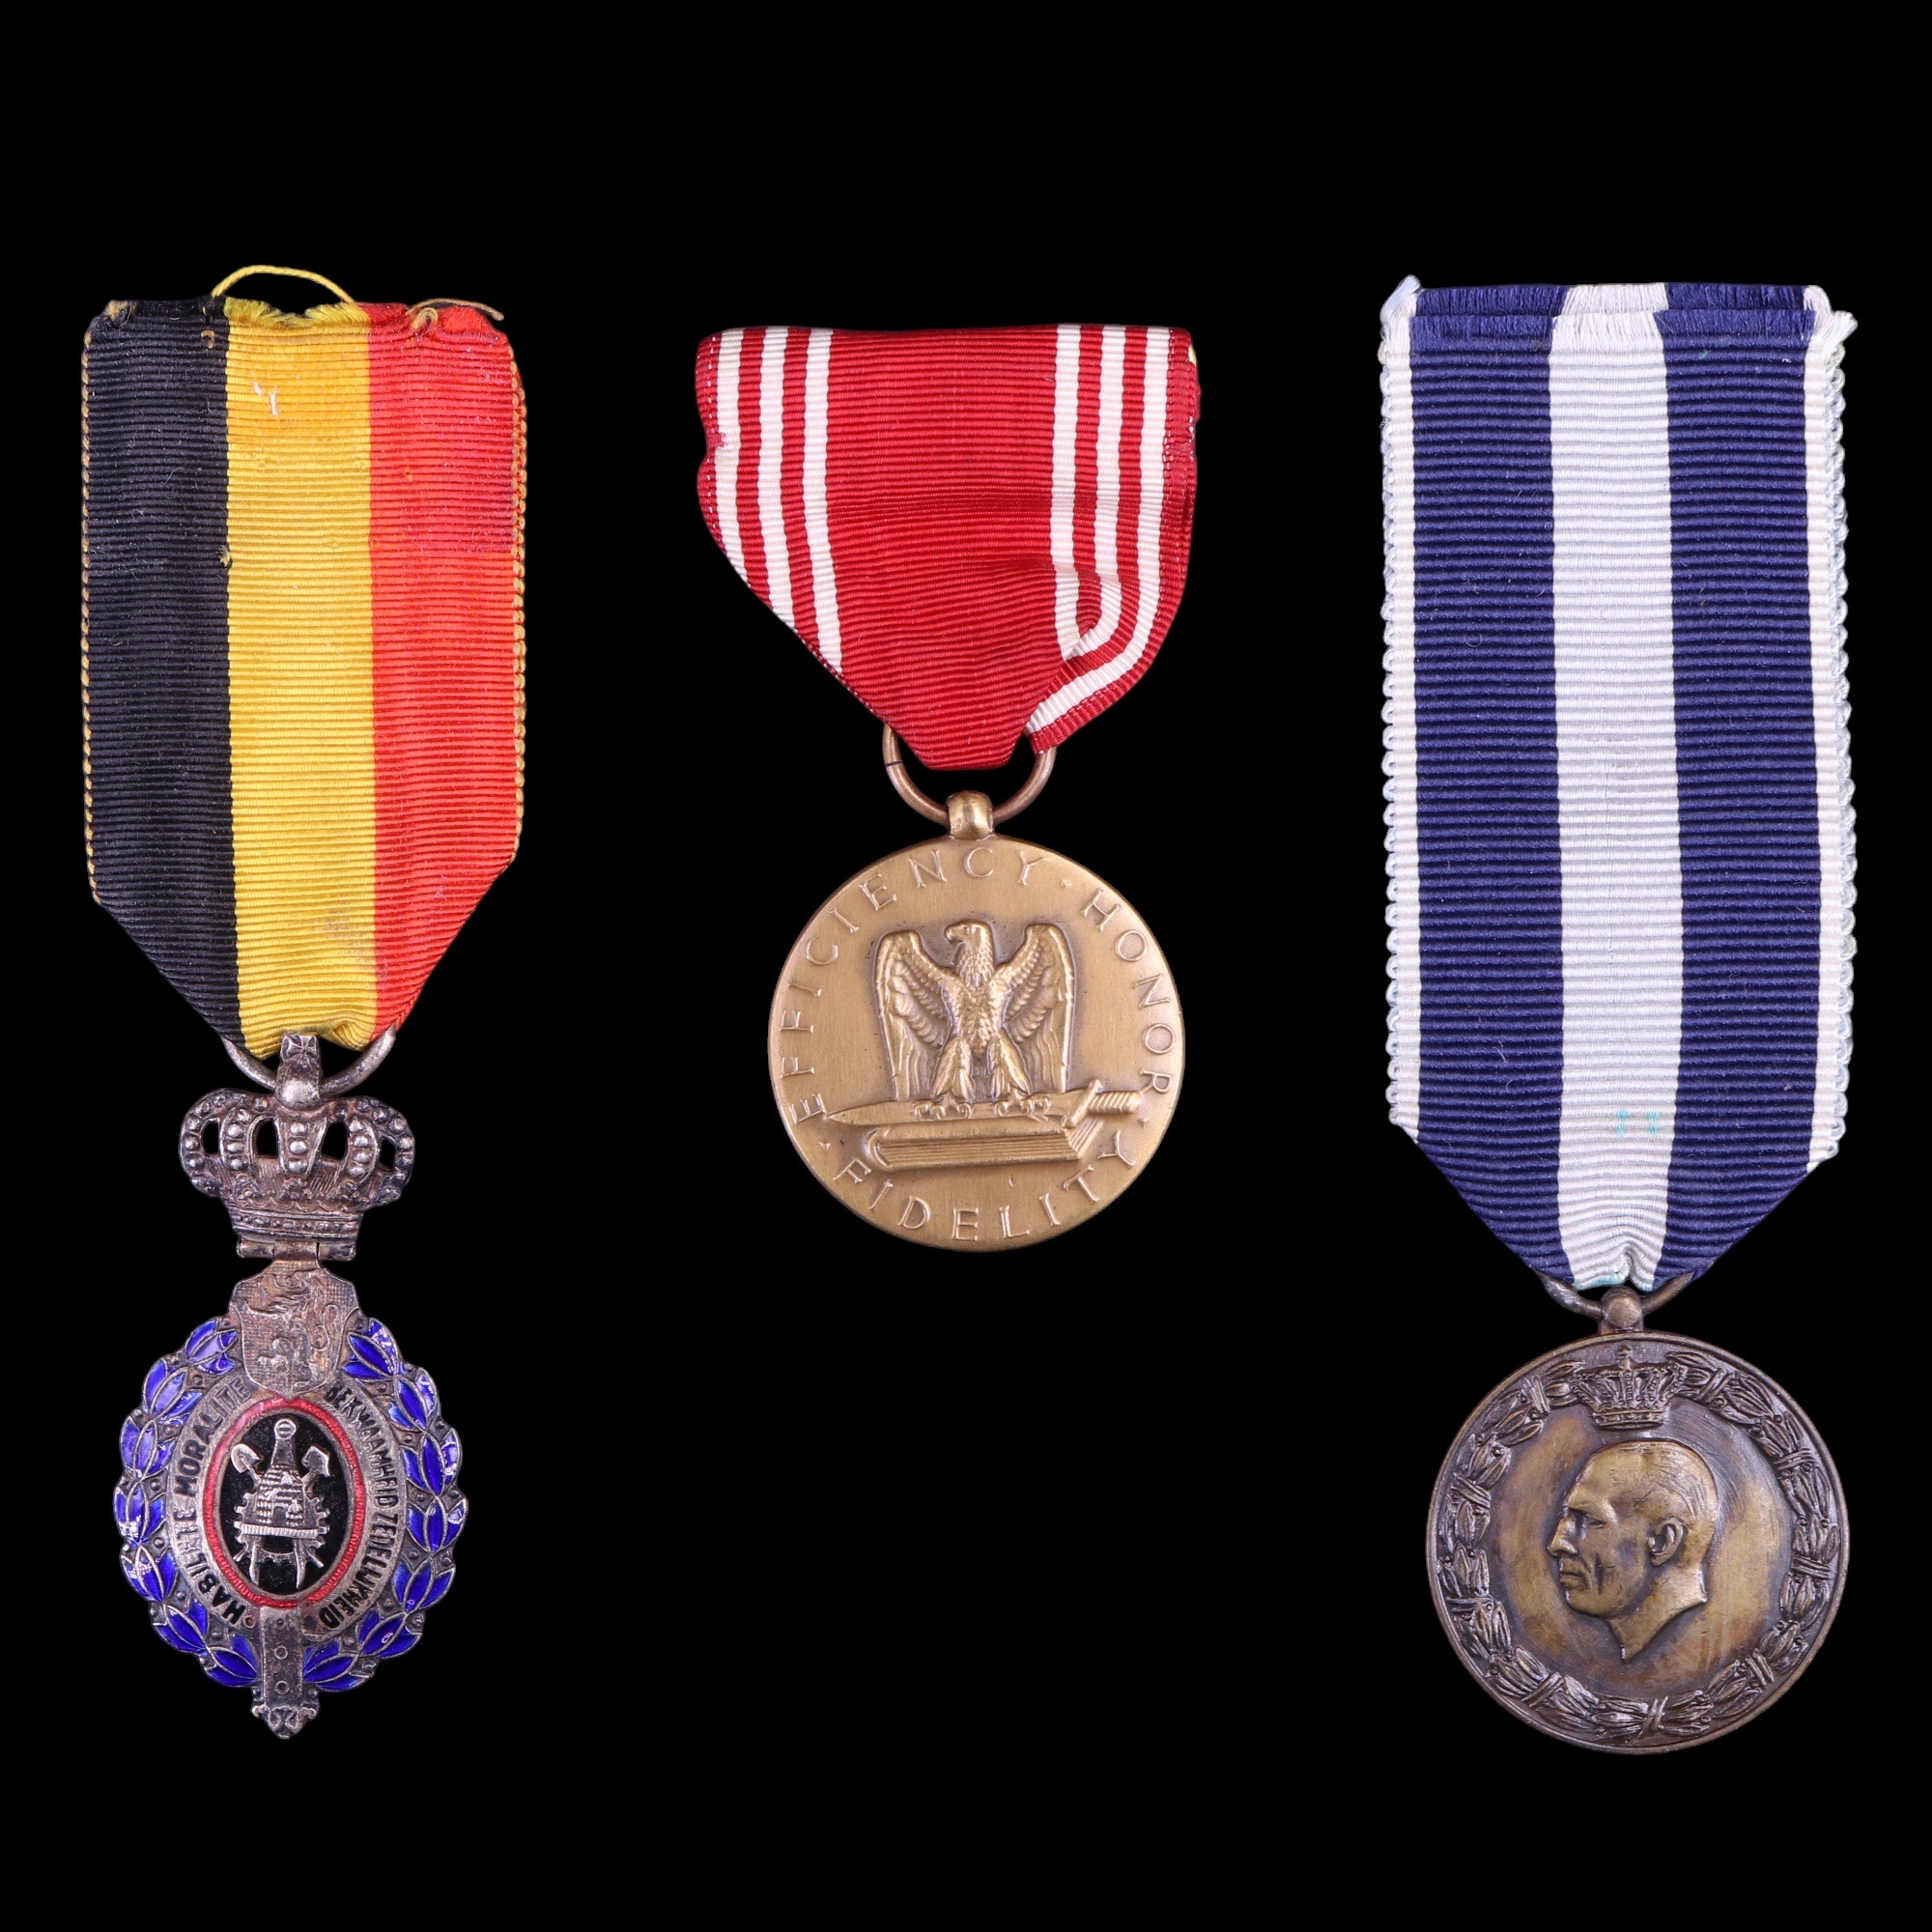 A Greek 1940-41 campaign medal together with a Belgian labour decoration and a US good conduct